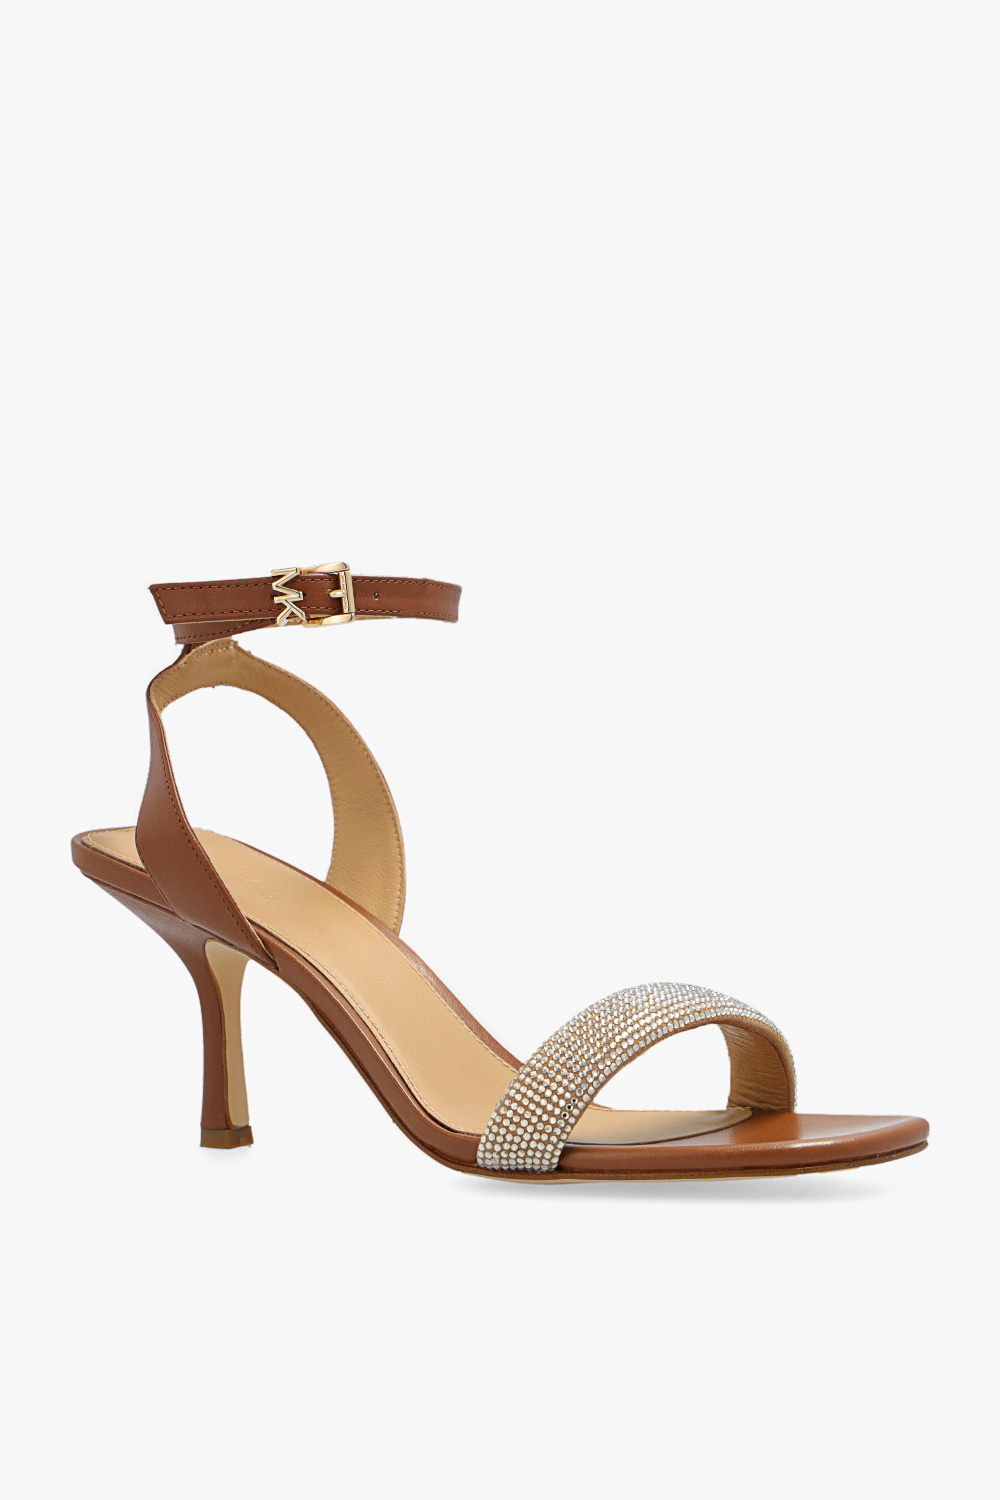 The California slip-on shoes Nude ‘Carrie’ heeled sandals